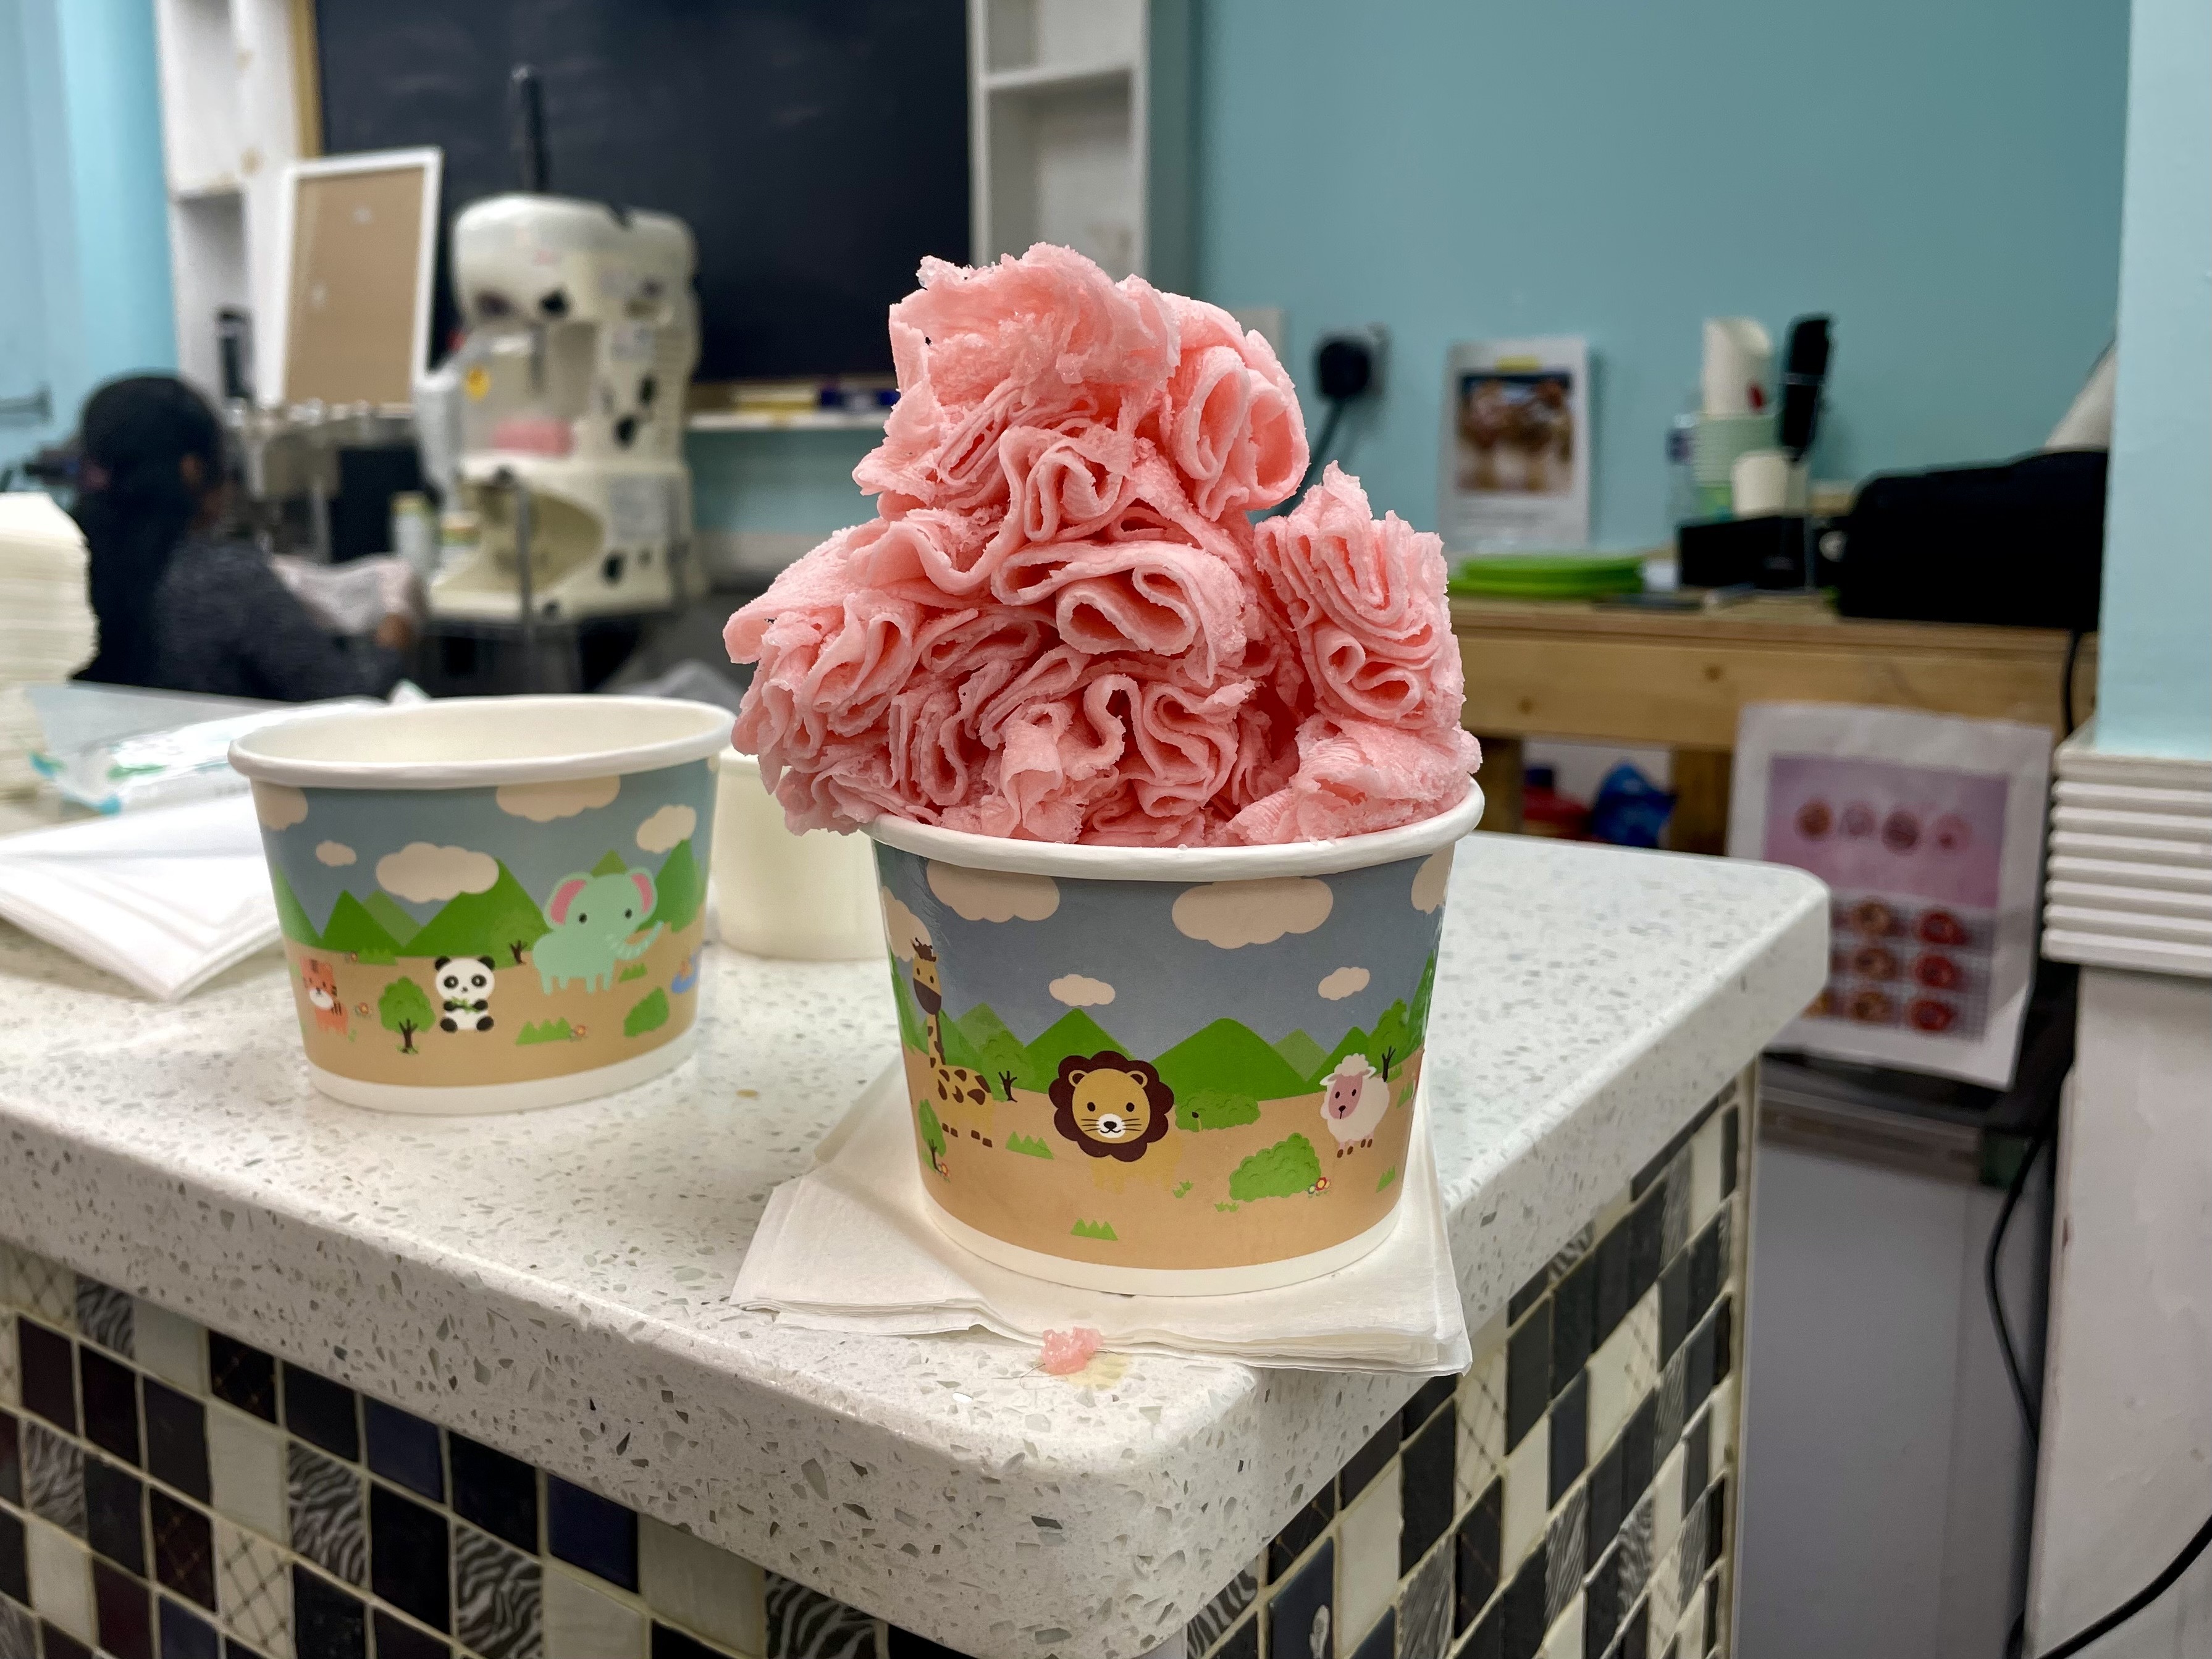 8 places to find international ice cream in Philly pic